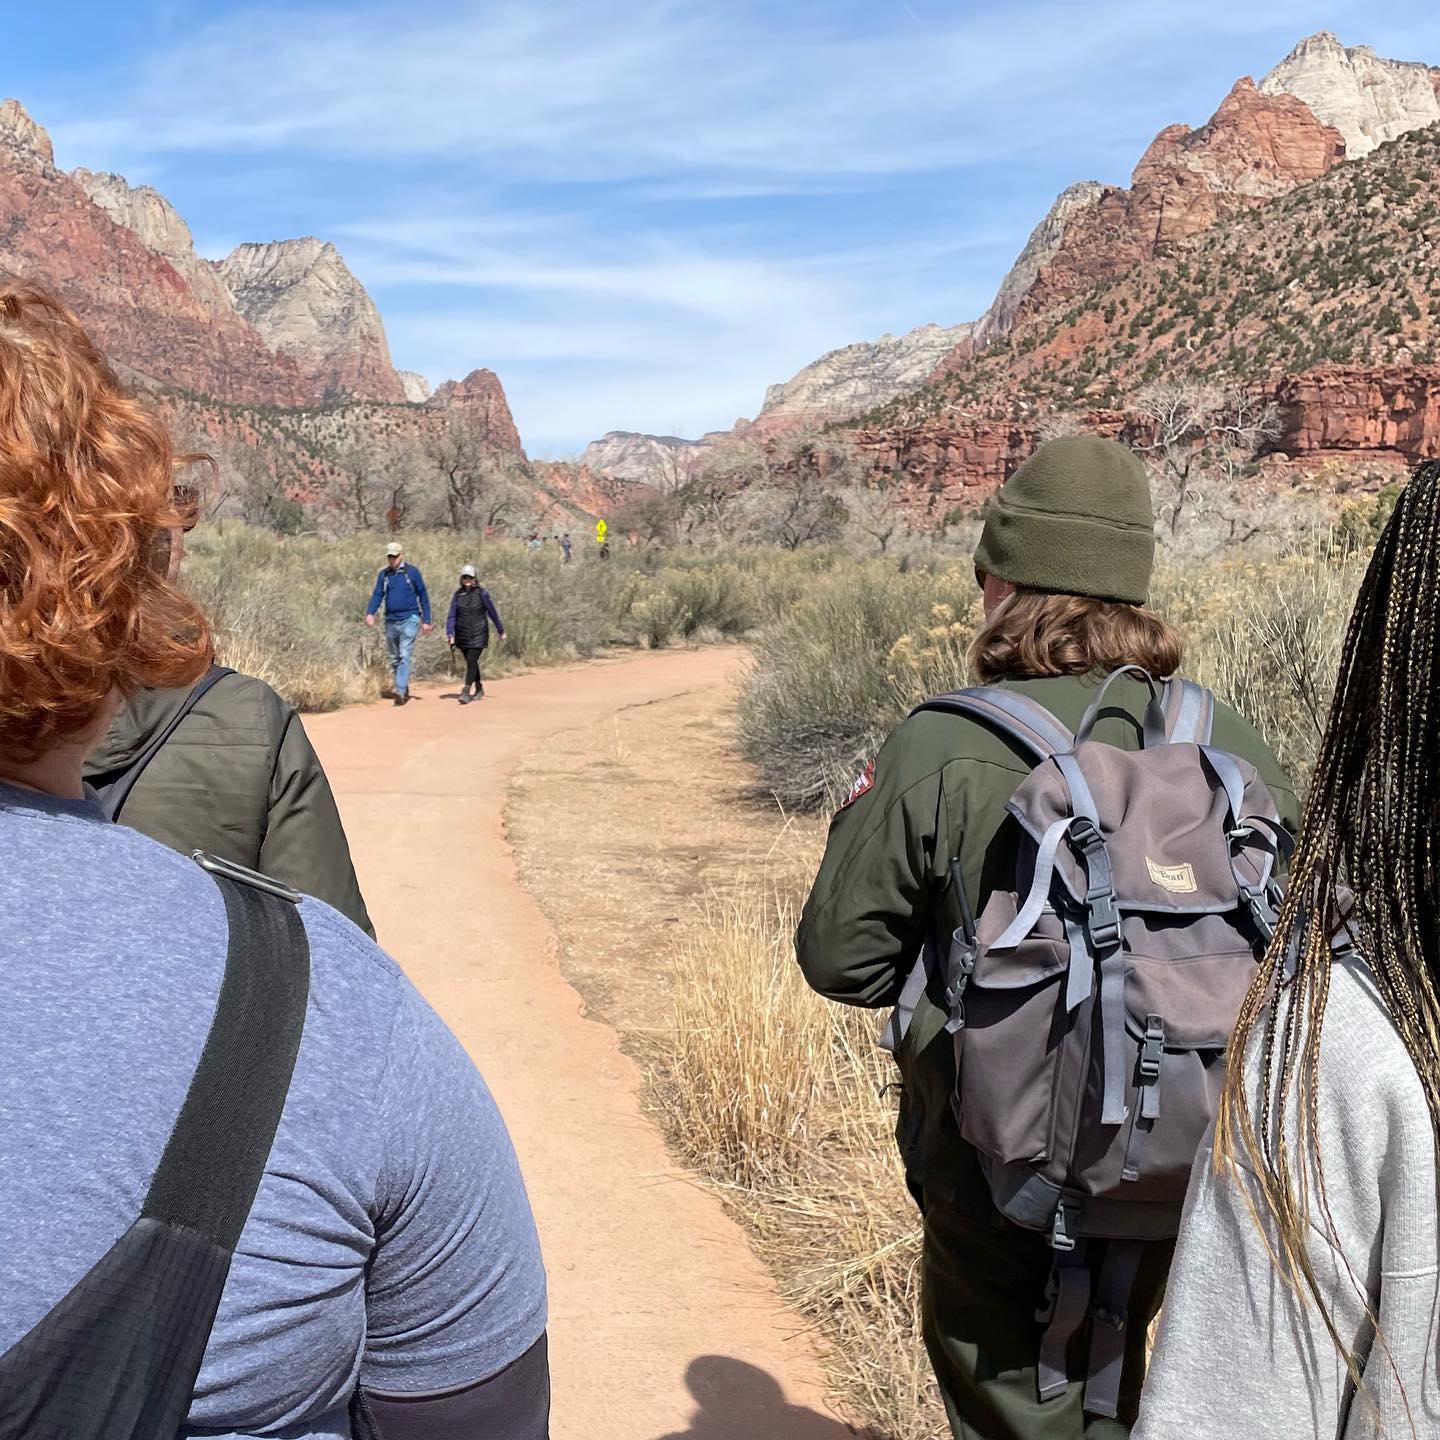 National Park Rangers make @zionnps come alive. The people who offer can make or break the experience. Ranger Jason blew us away during the Pa’rus Trail walk! @nationalparkservice